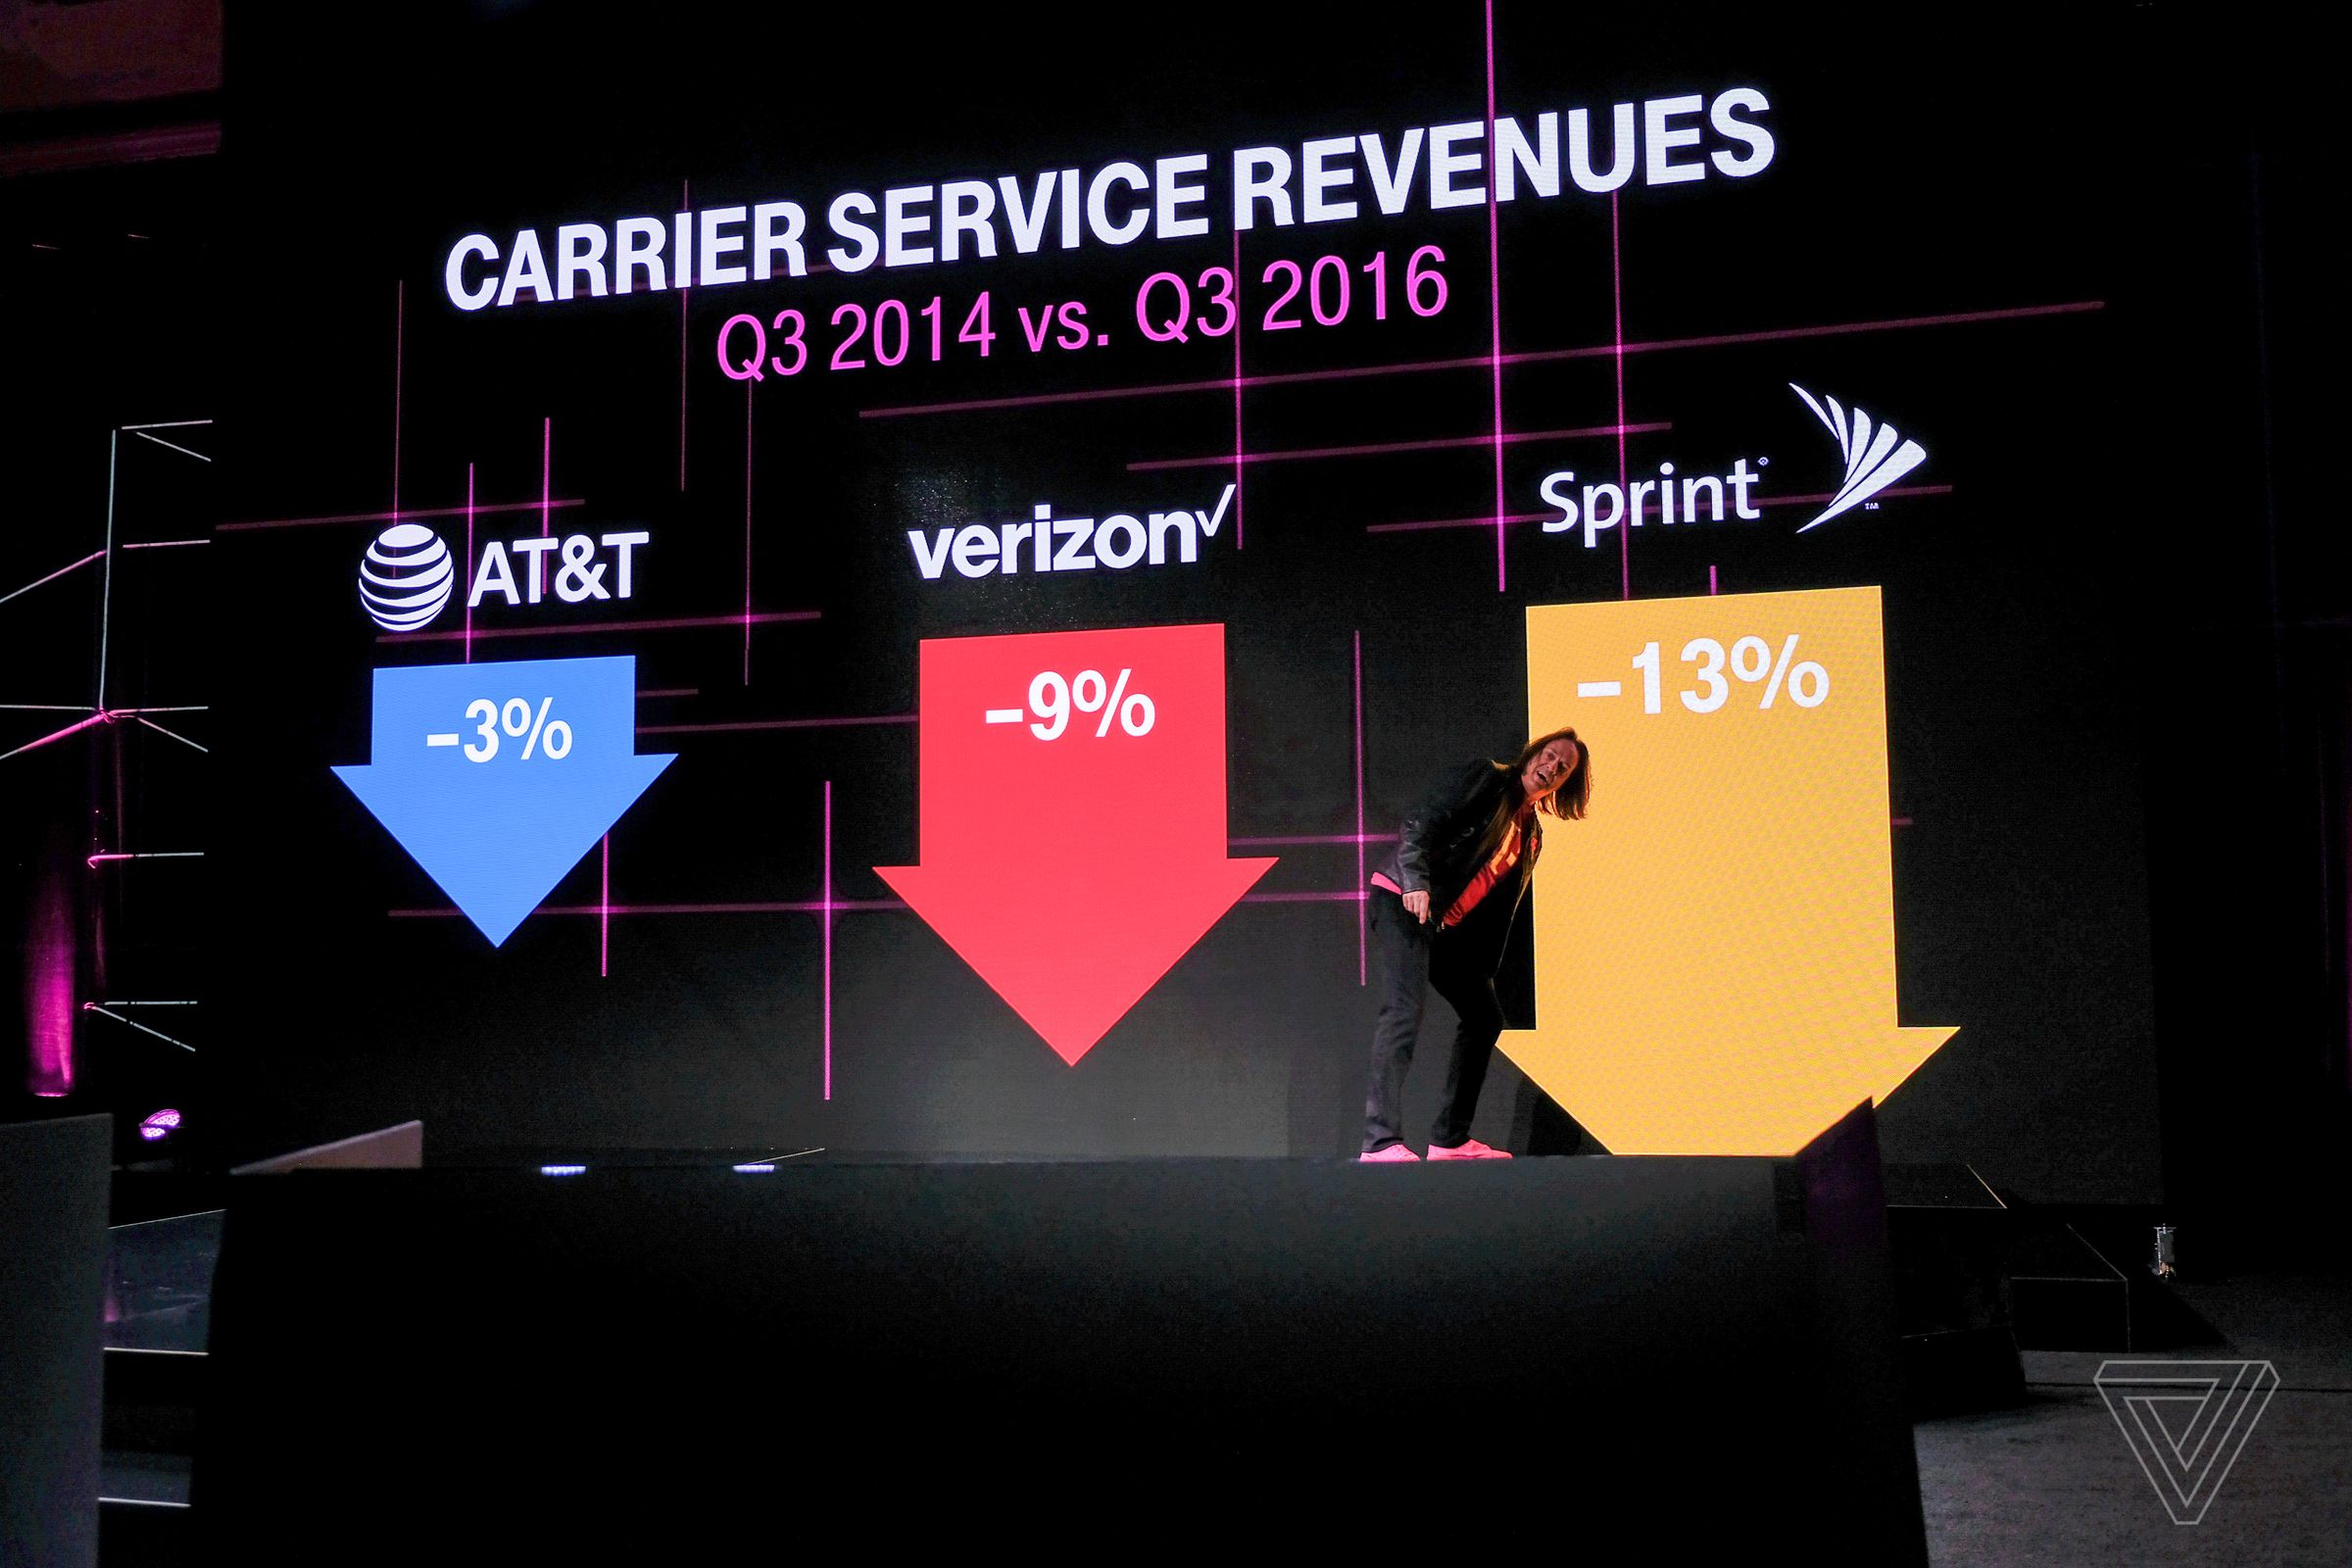 T-Mobile CEO John Legere insults Sprint’s financial performance at CES 2017.